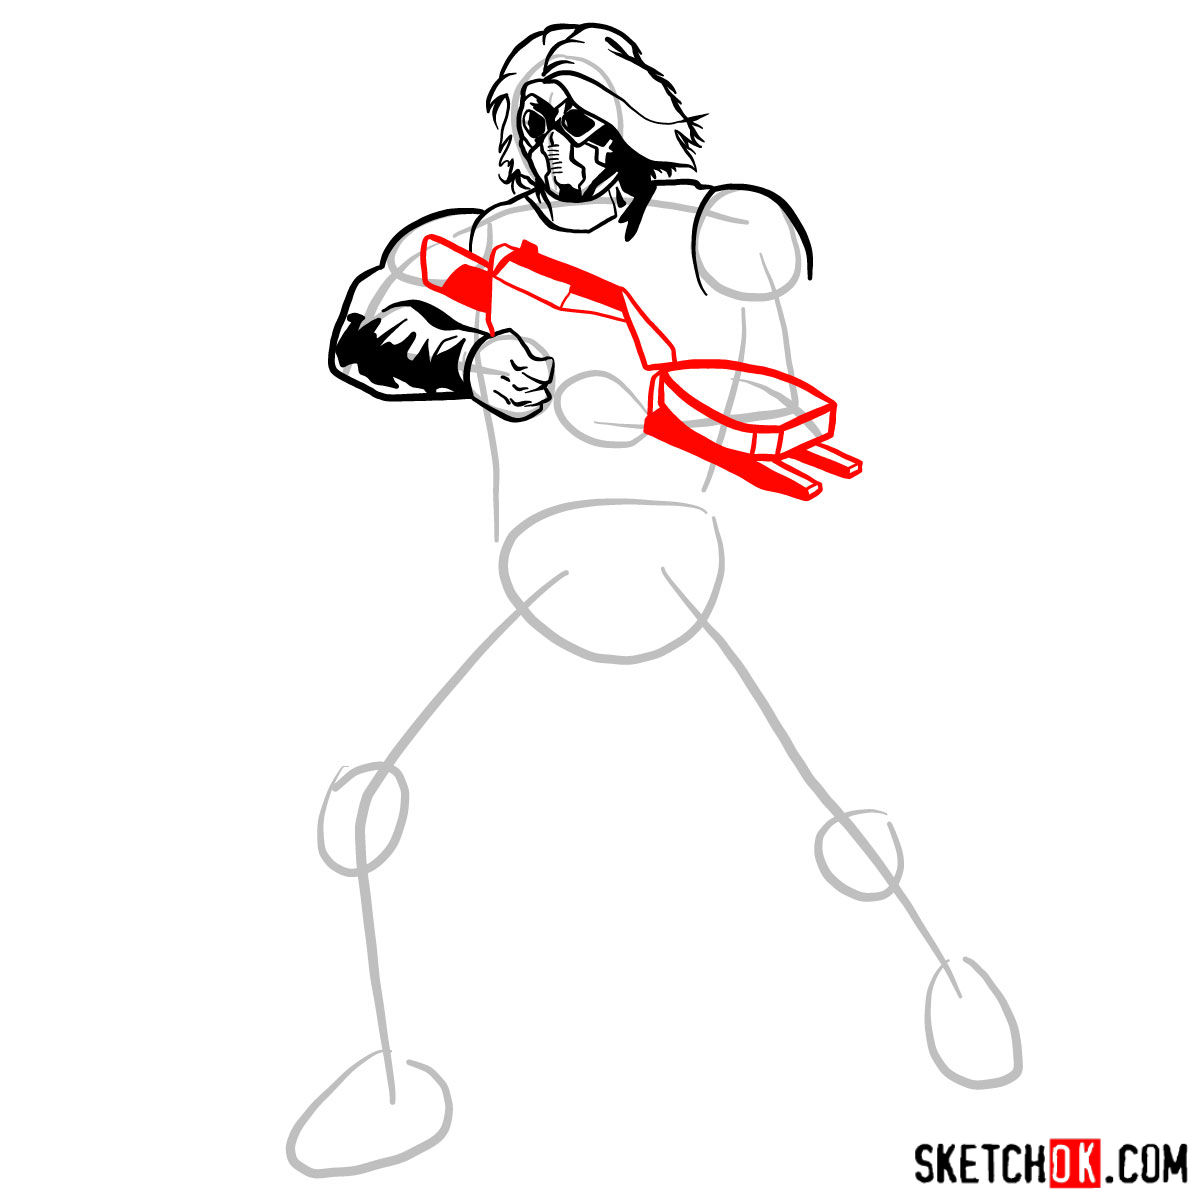 How to draw Bucky Barnes the Winter Soldier - step 08